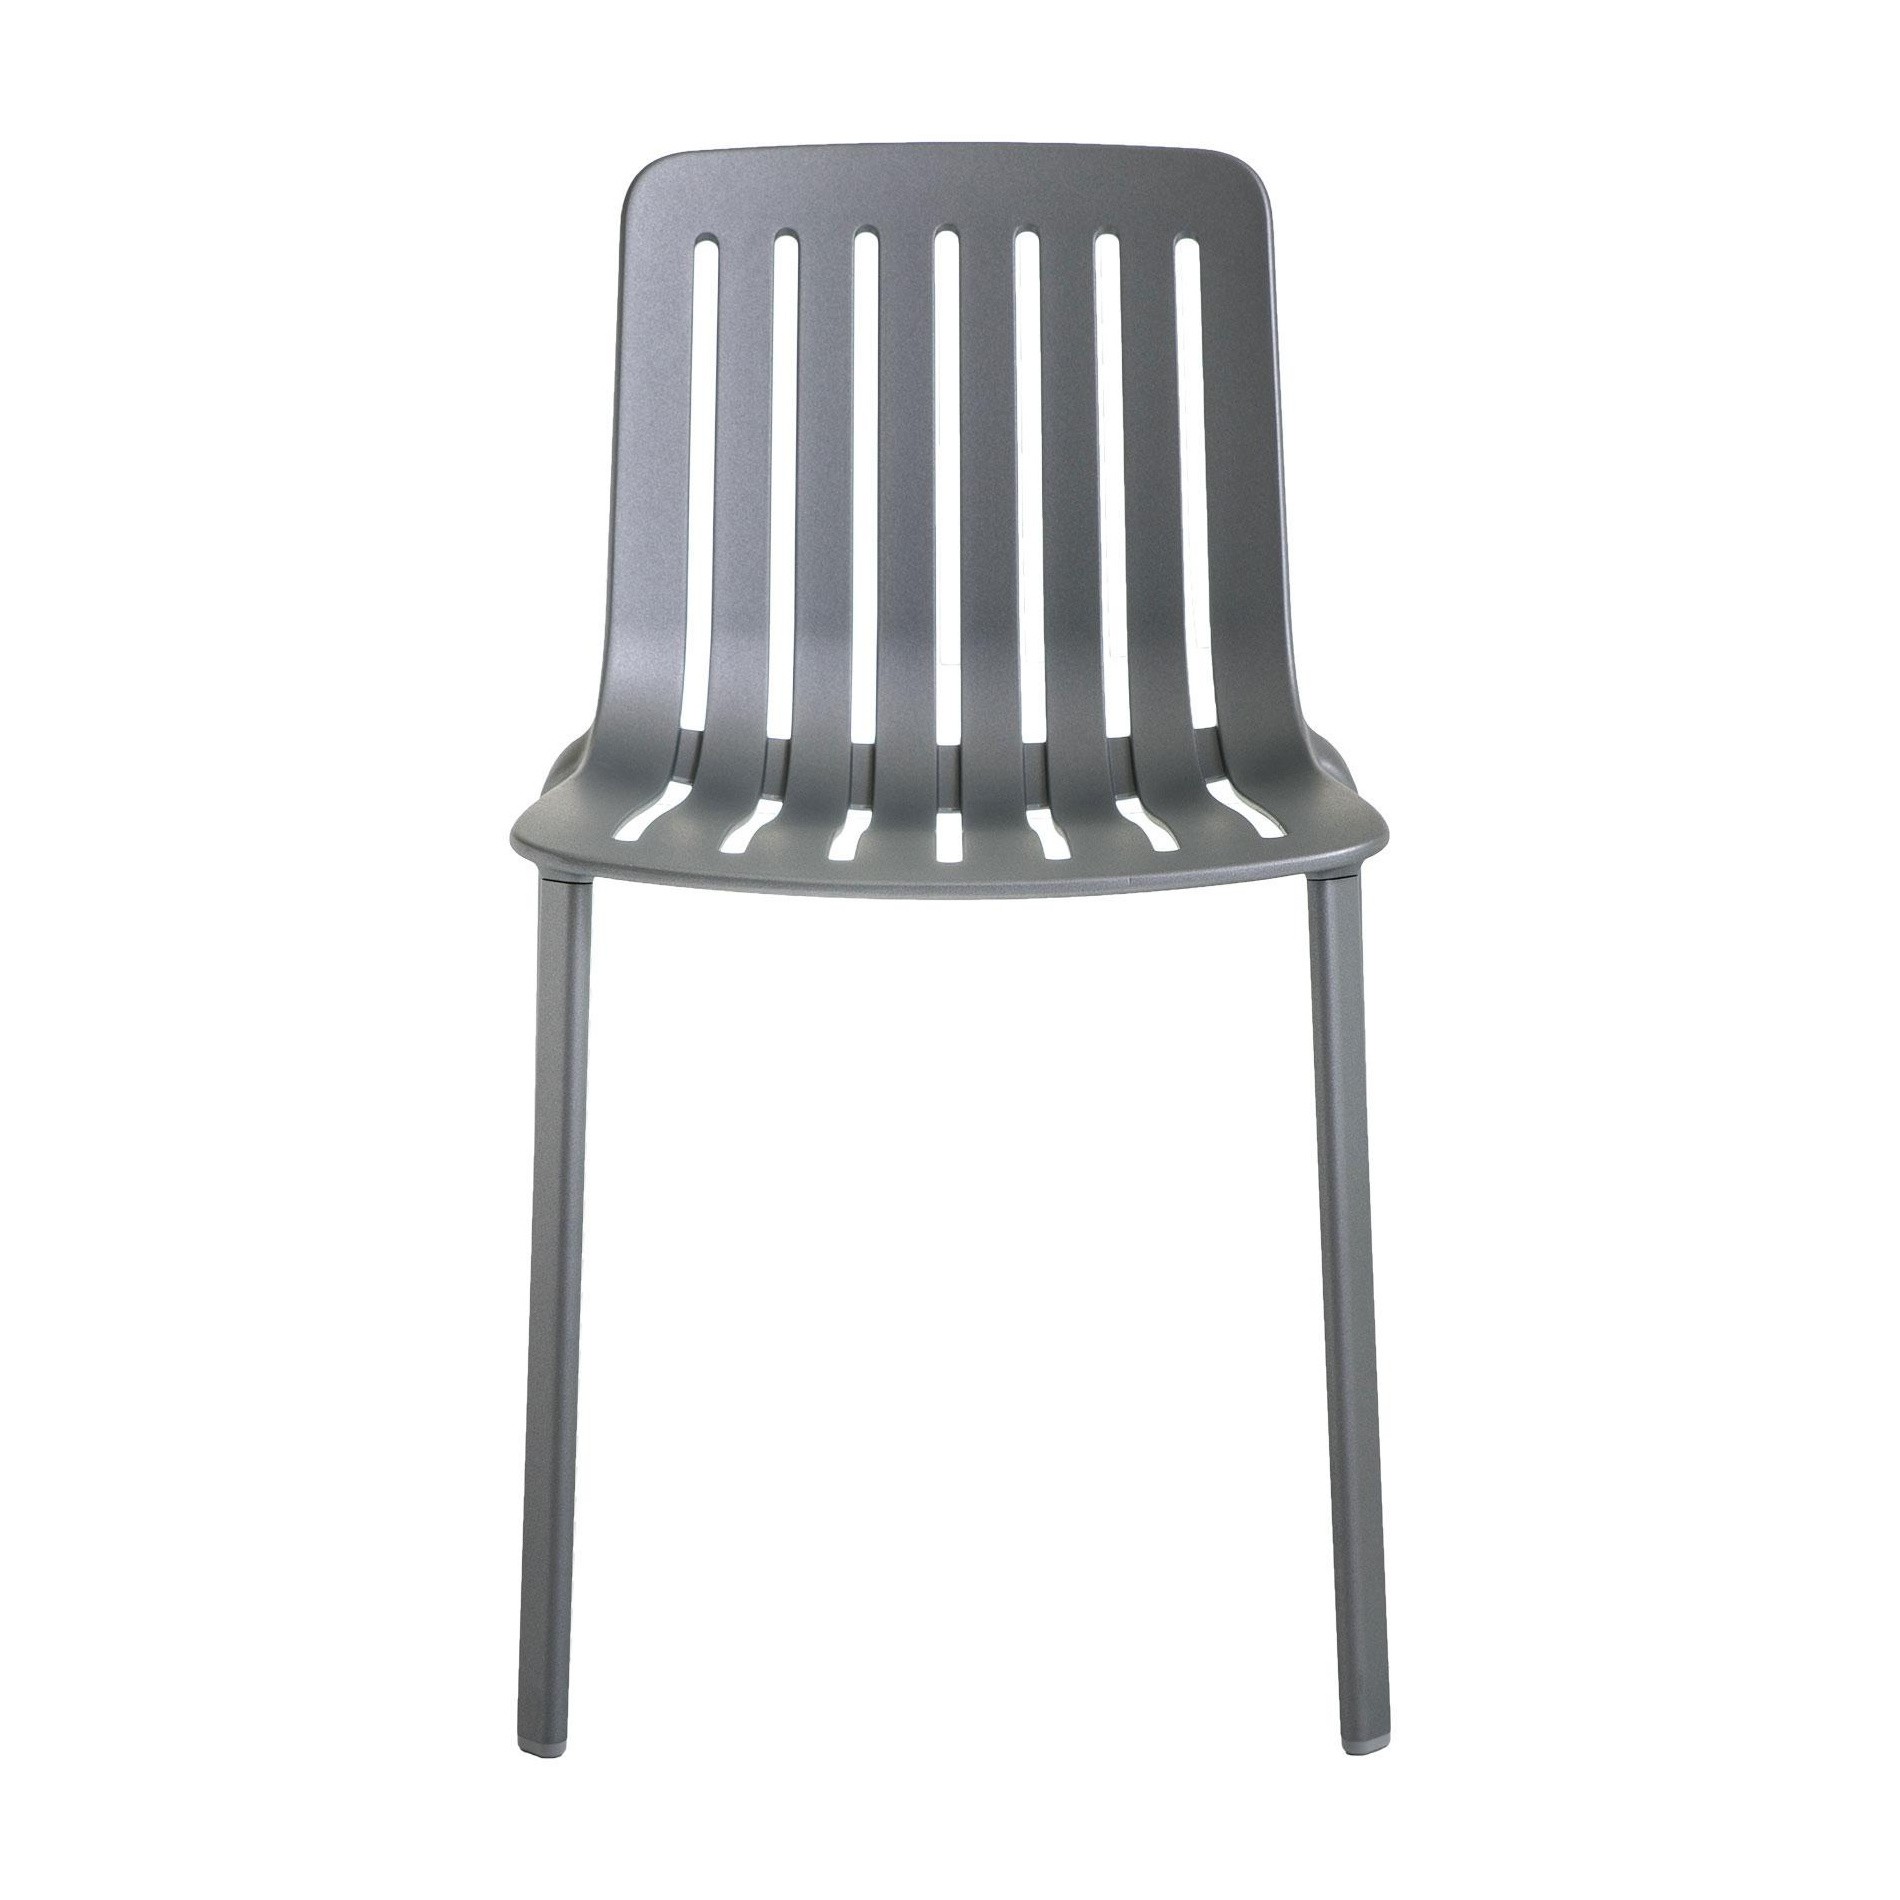 PLATO chair - set of 2 pieces